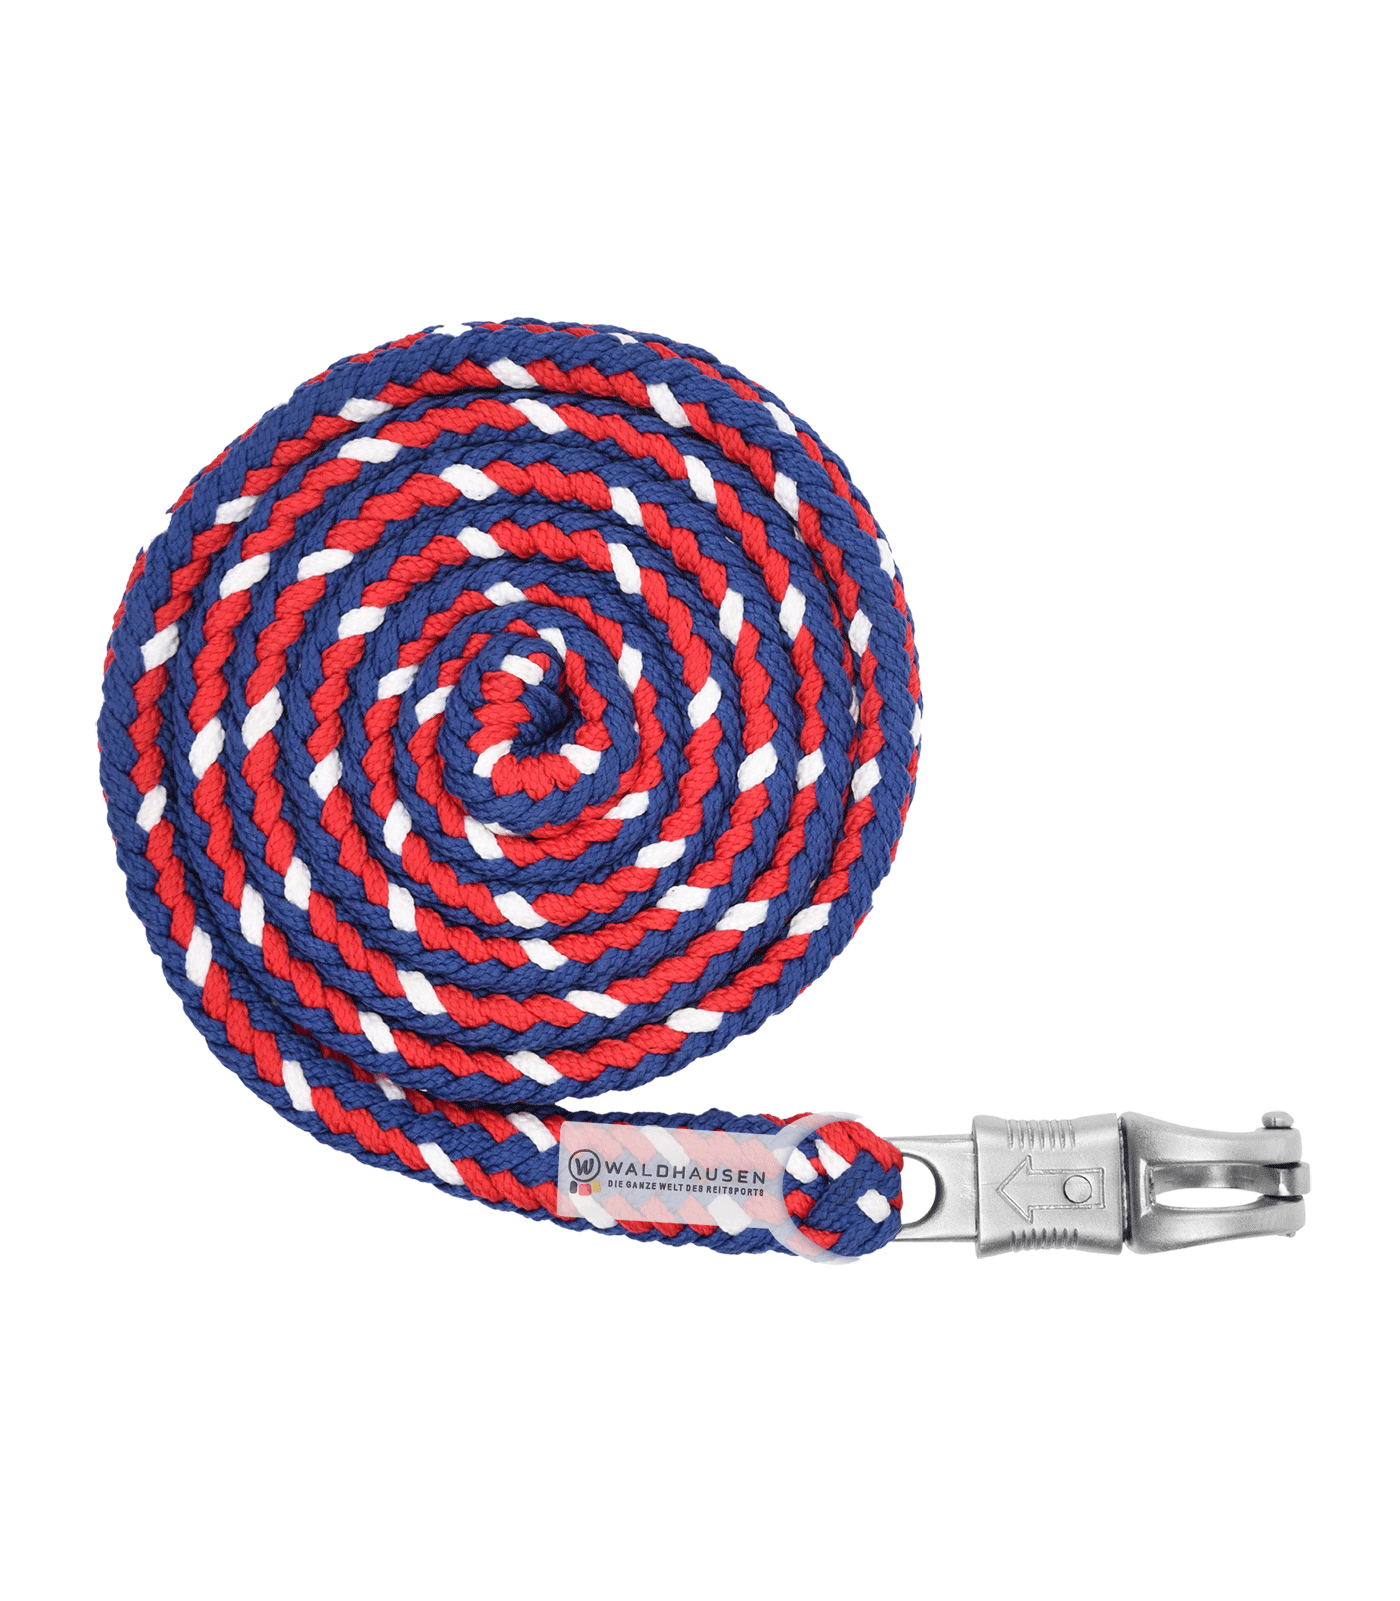 Plus Lead Rope - Panic Hook red/blue/white